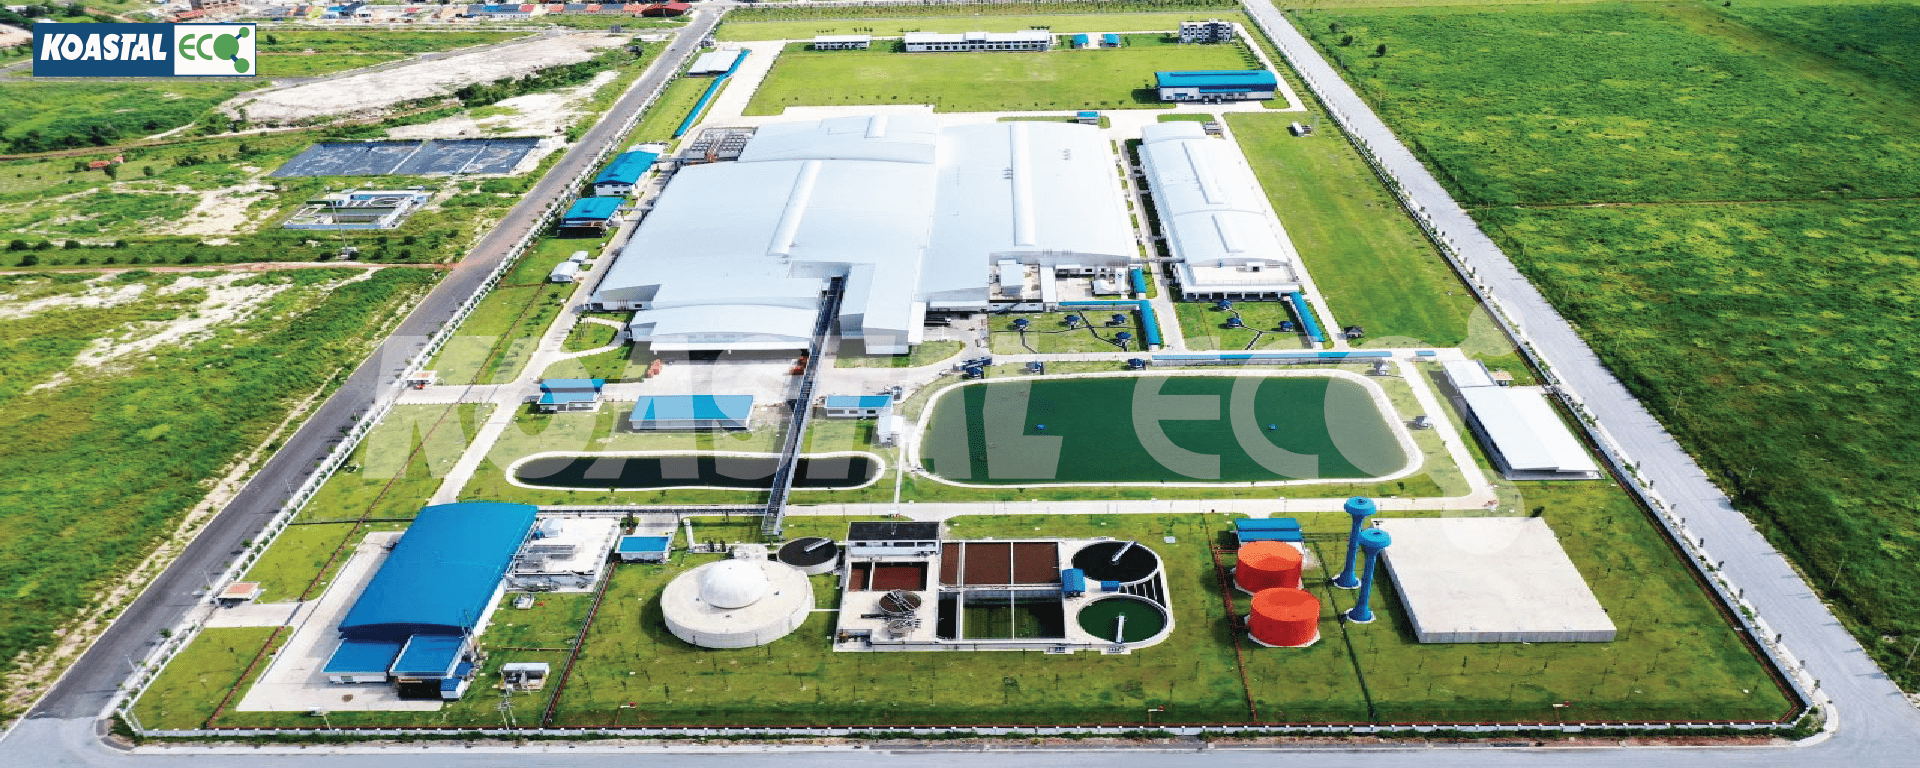 The wastewater treatment plant of CPV Food Slaughterhouse and chicken exporting processing